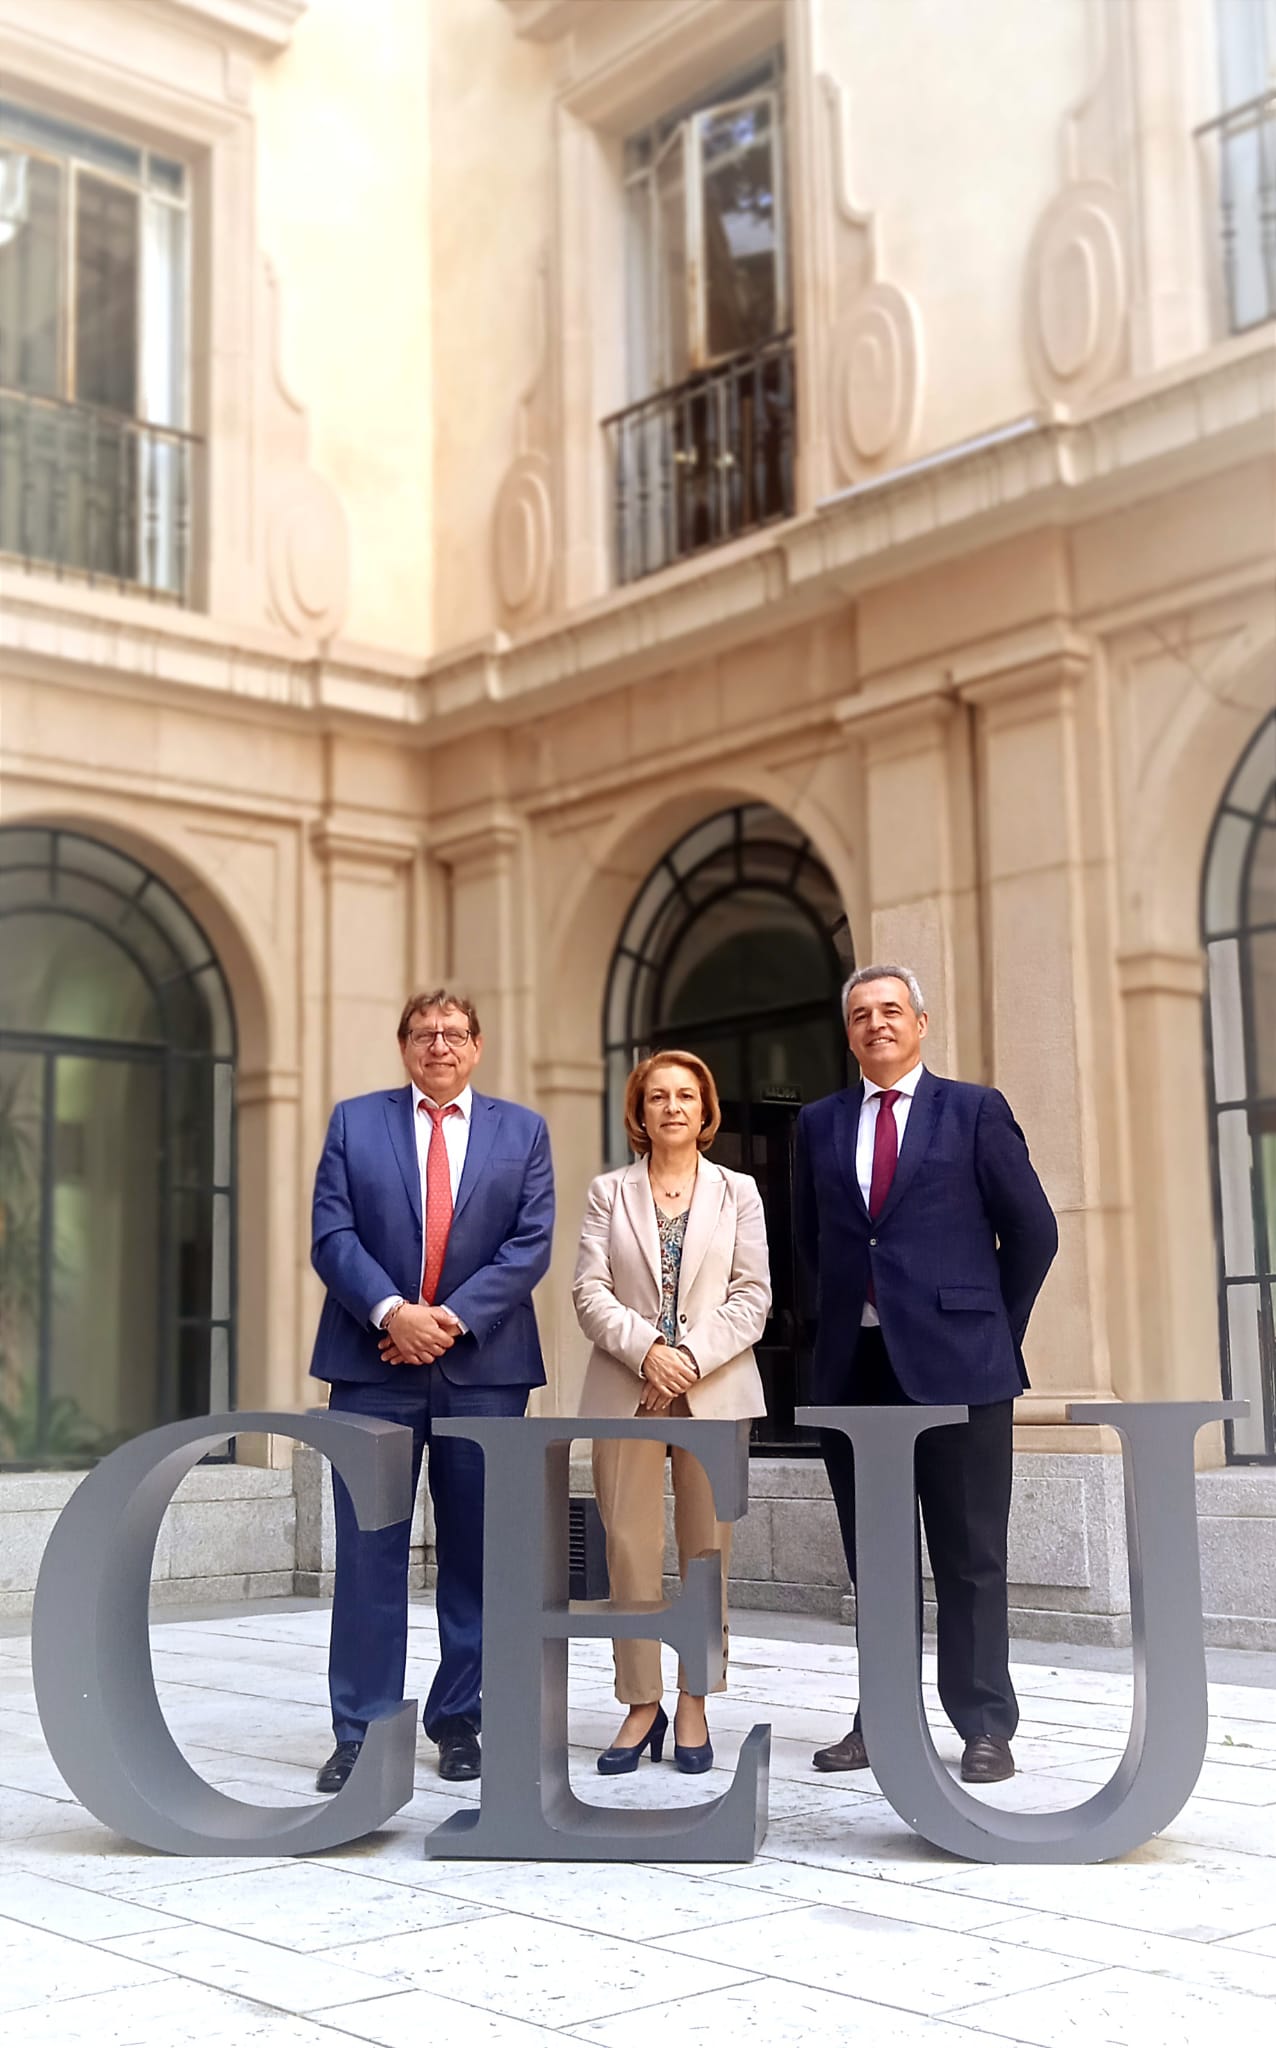 The president of ASEPELT, José-María Montero, proposes to the vice president of the CRUE that Spanish Universities finance the open publication of Spanish journals with the FECyT Quality seal